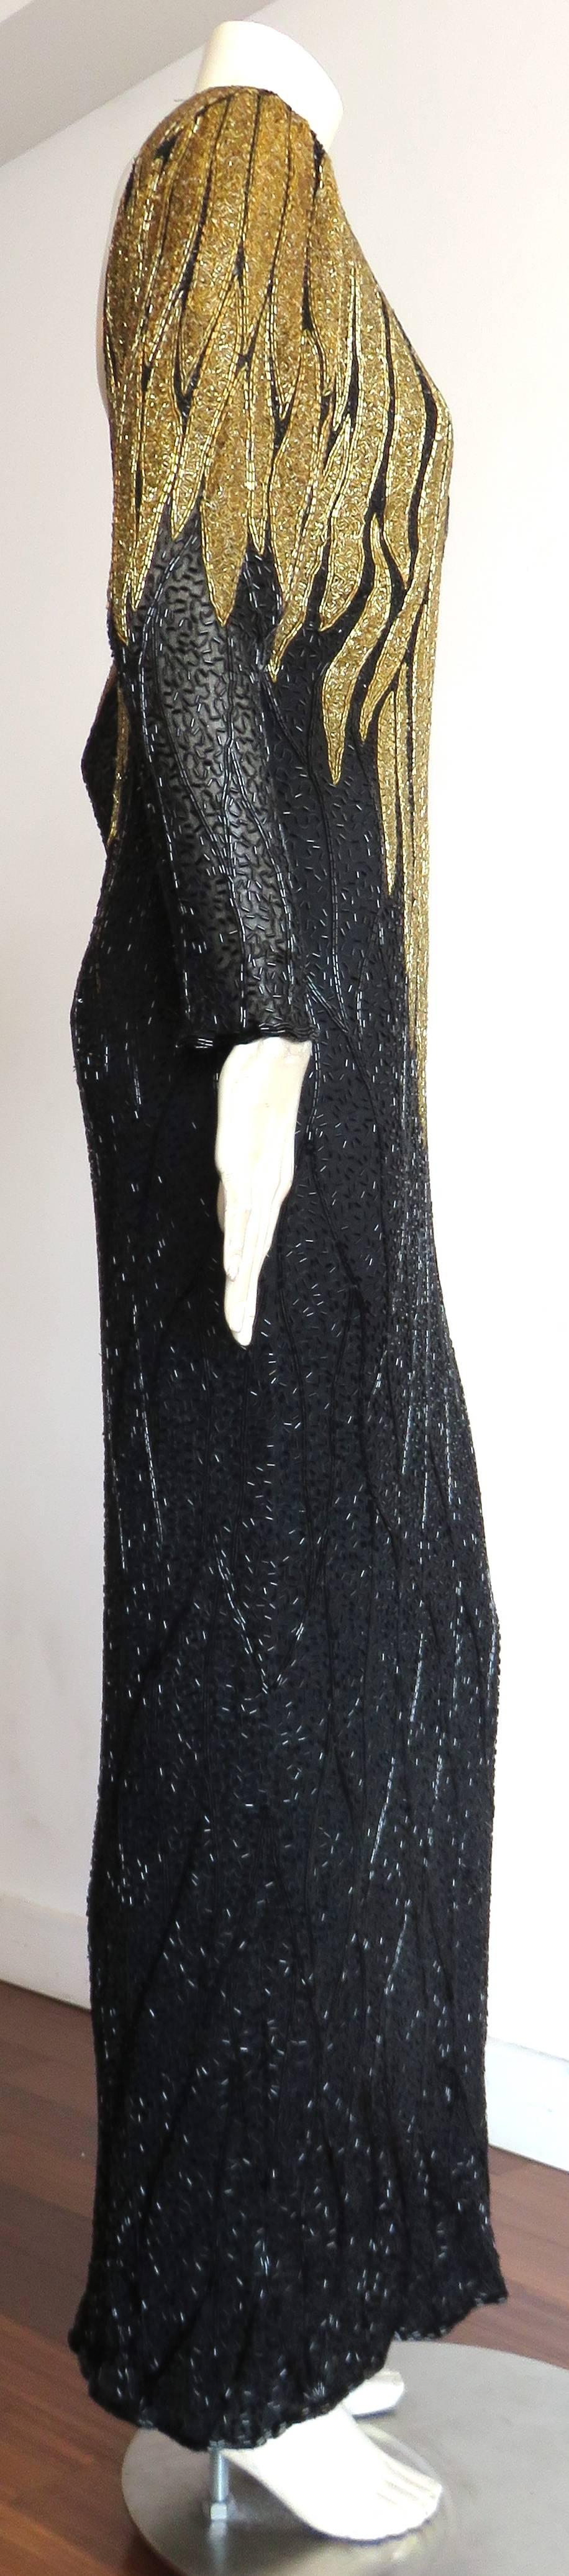 cher flame dress